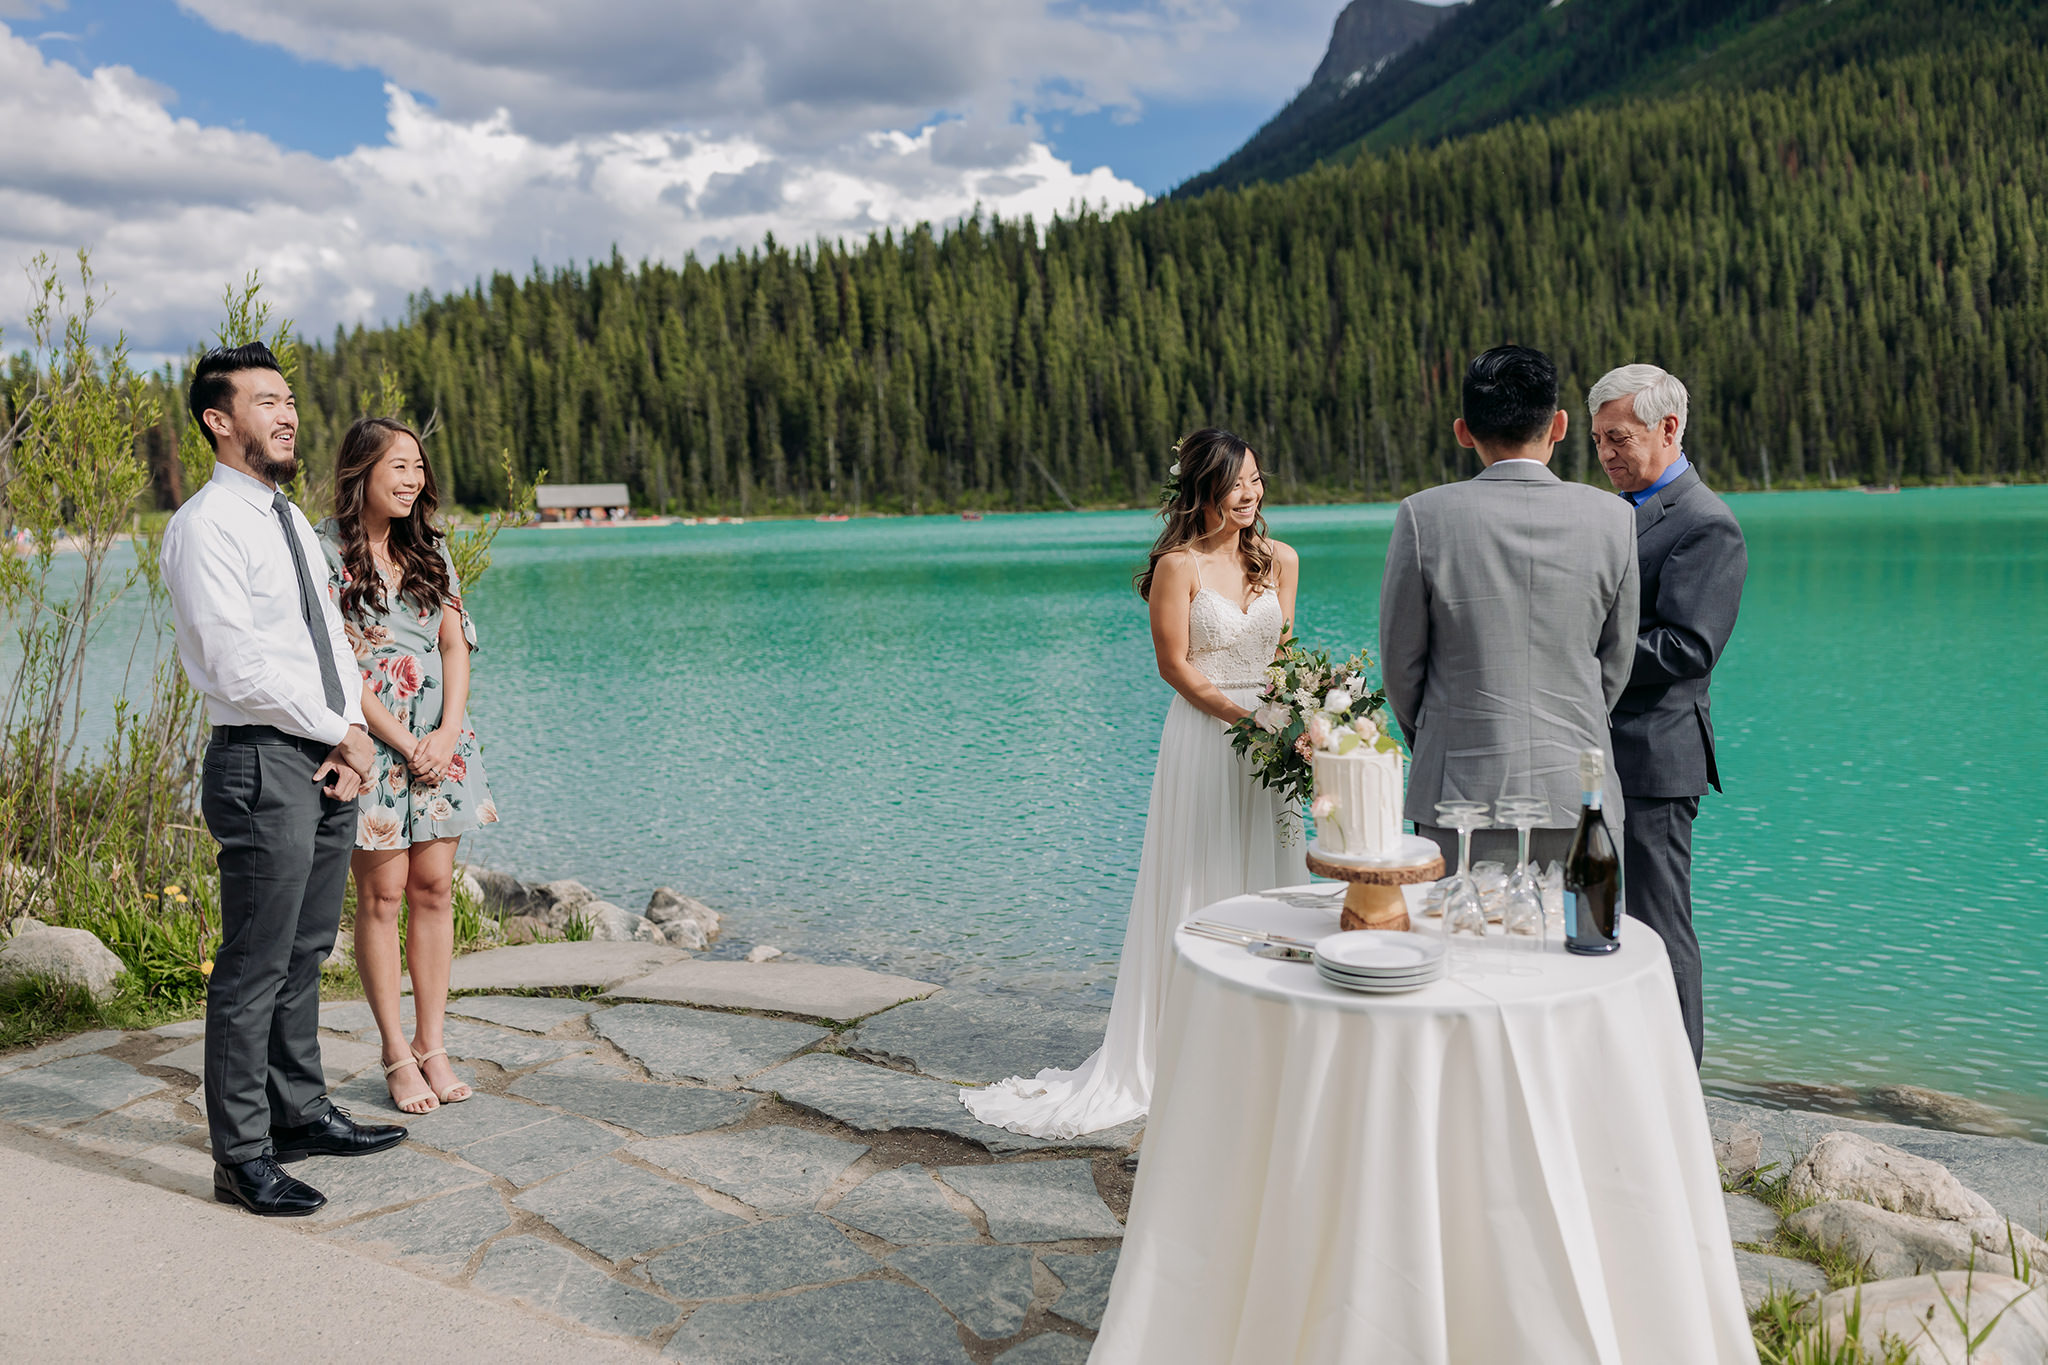 Lake Louise lakeshore wedding ceremony photographed by elopement photographer ENV Photography